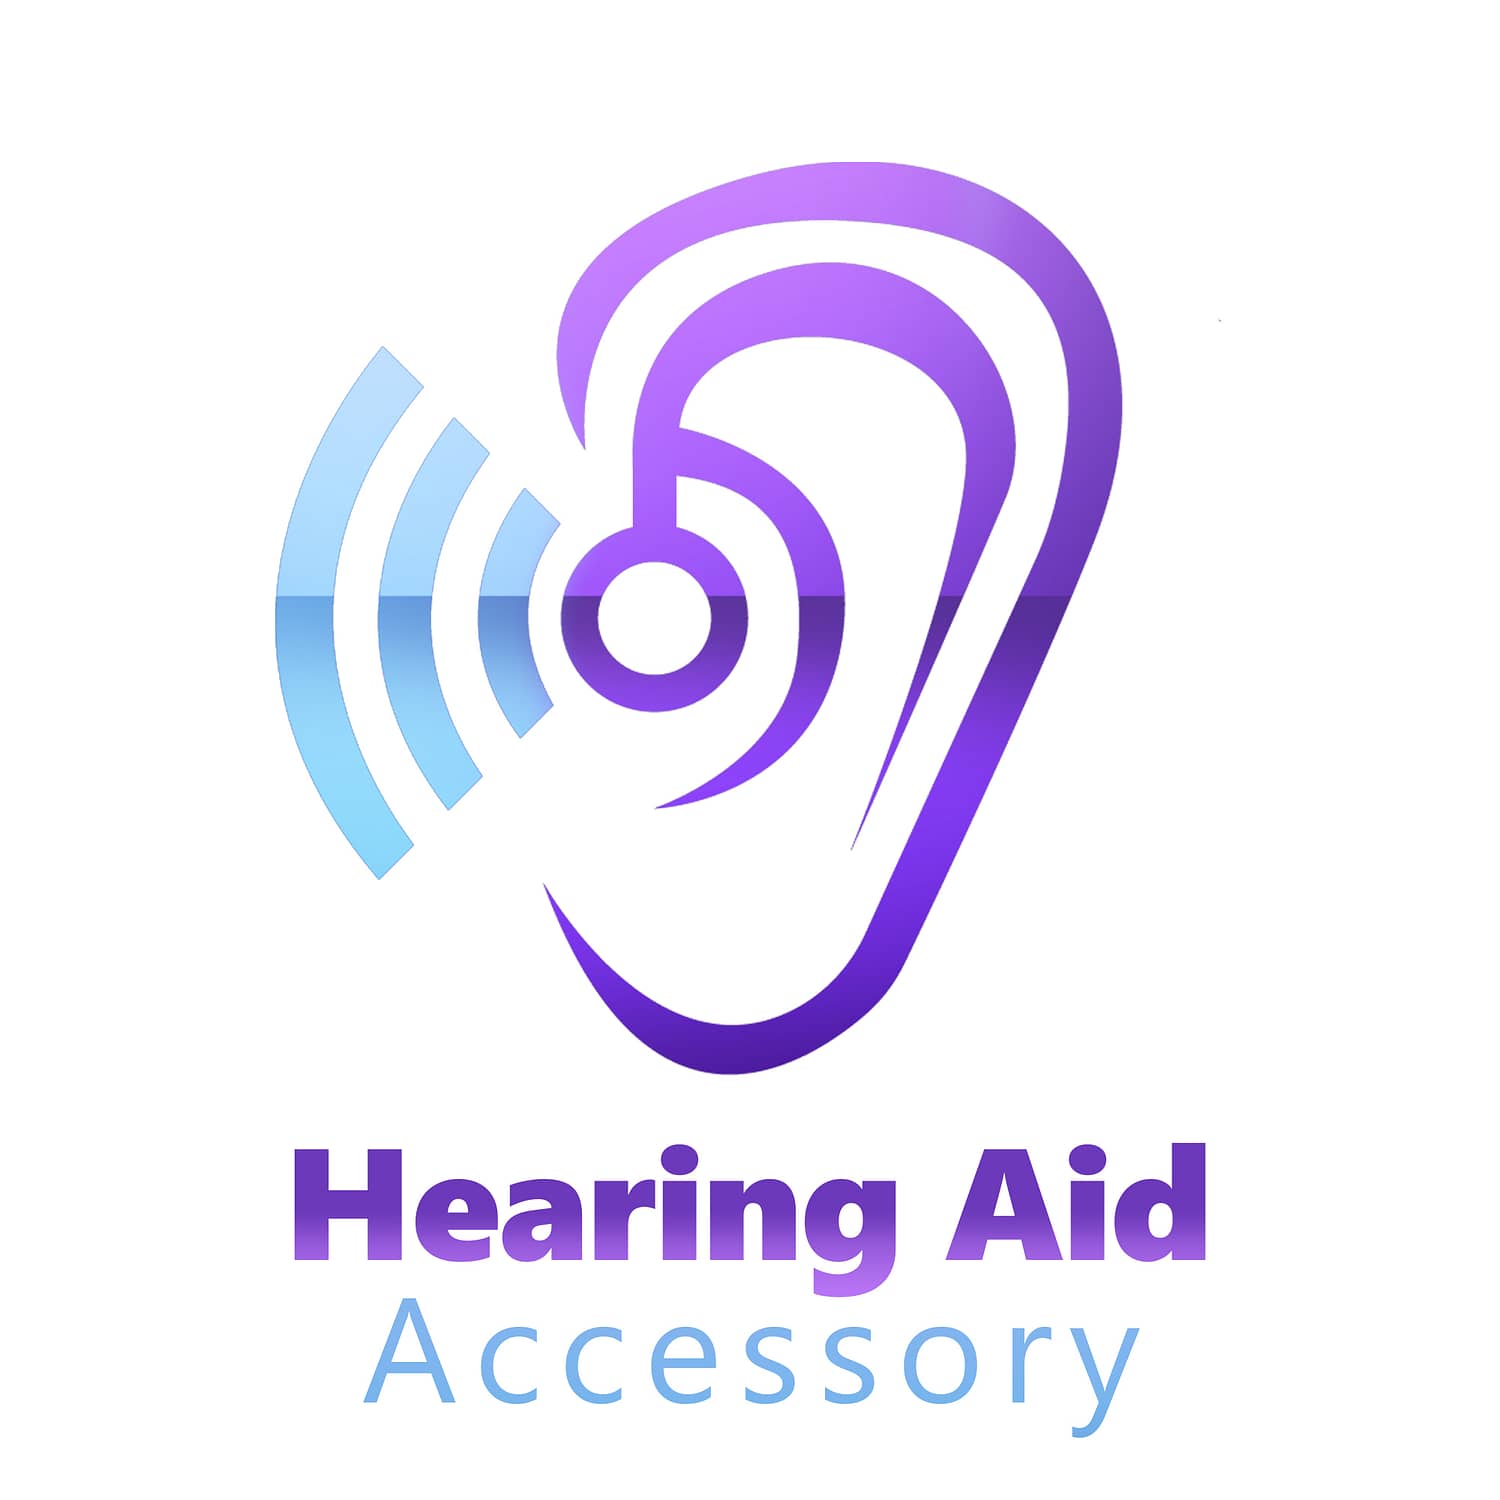 You are currently viewing Where can I purchase Hearing Aid Accessories in the U.S?